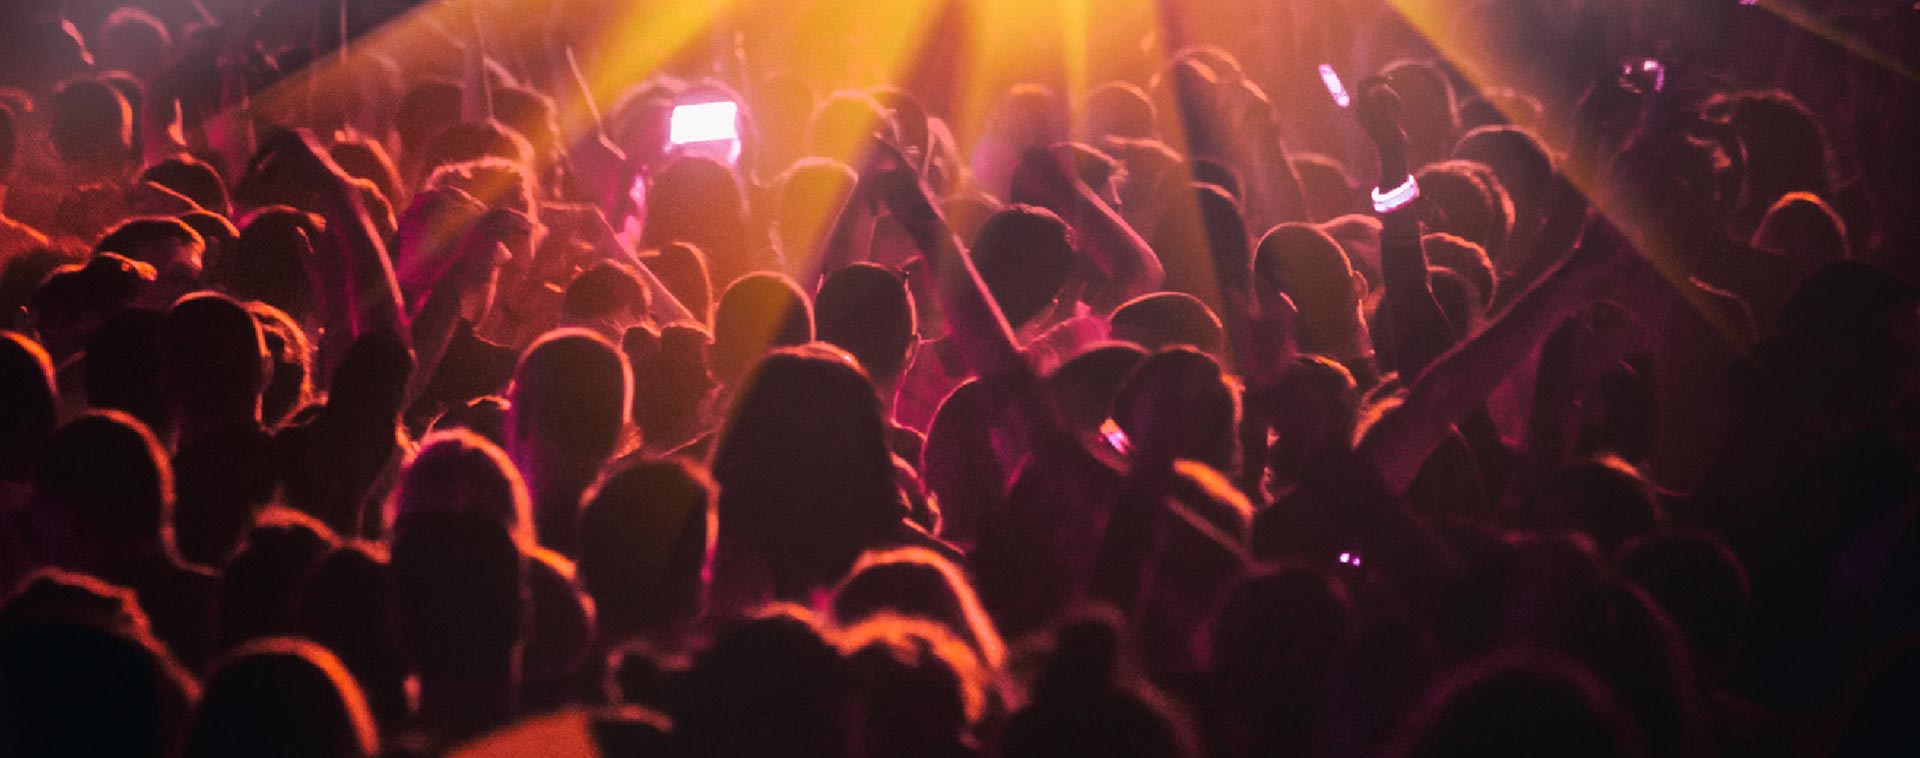 explore venues in your area to see if they have DJs playing the style of music you enjoy